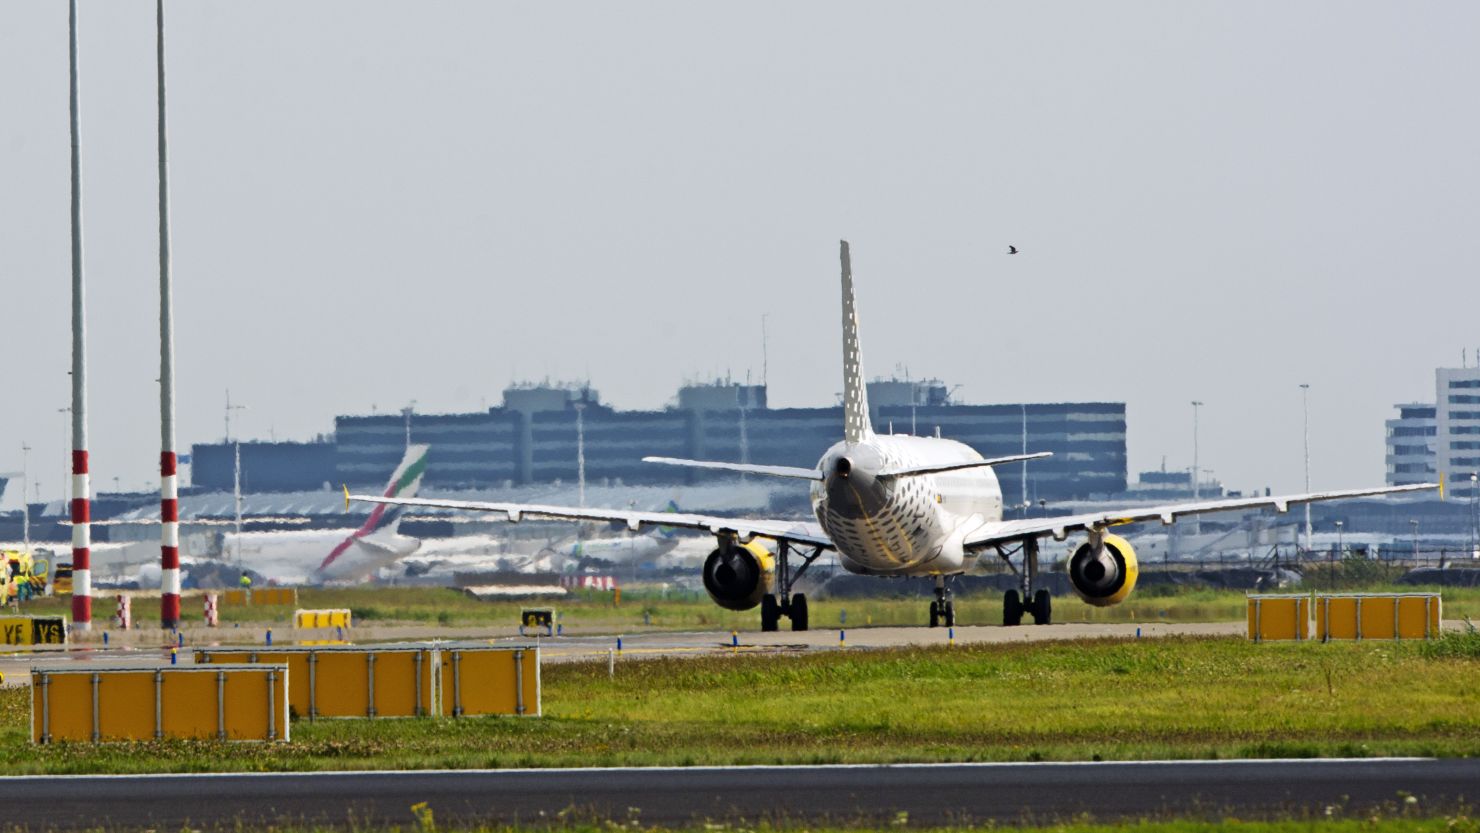 A picture taken on August 29, 2012 shows a plane of the Spanish company Vueling after it landed at Schiphol Airport in Amsterdam.